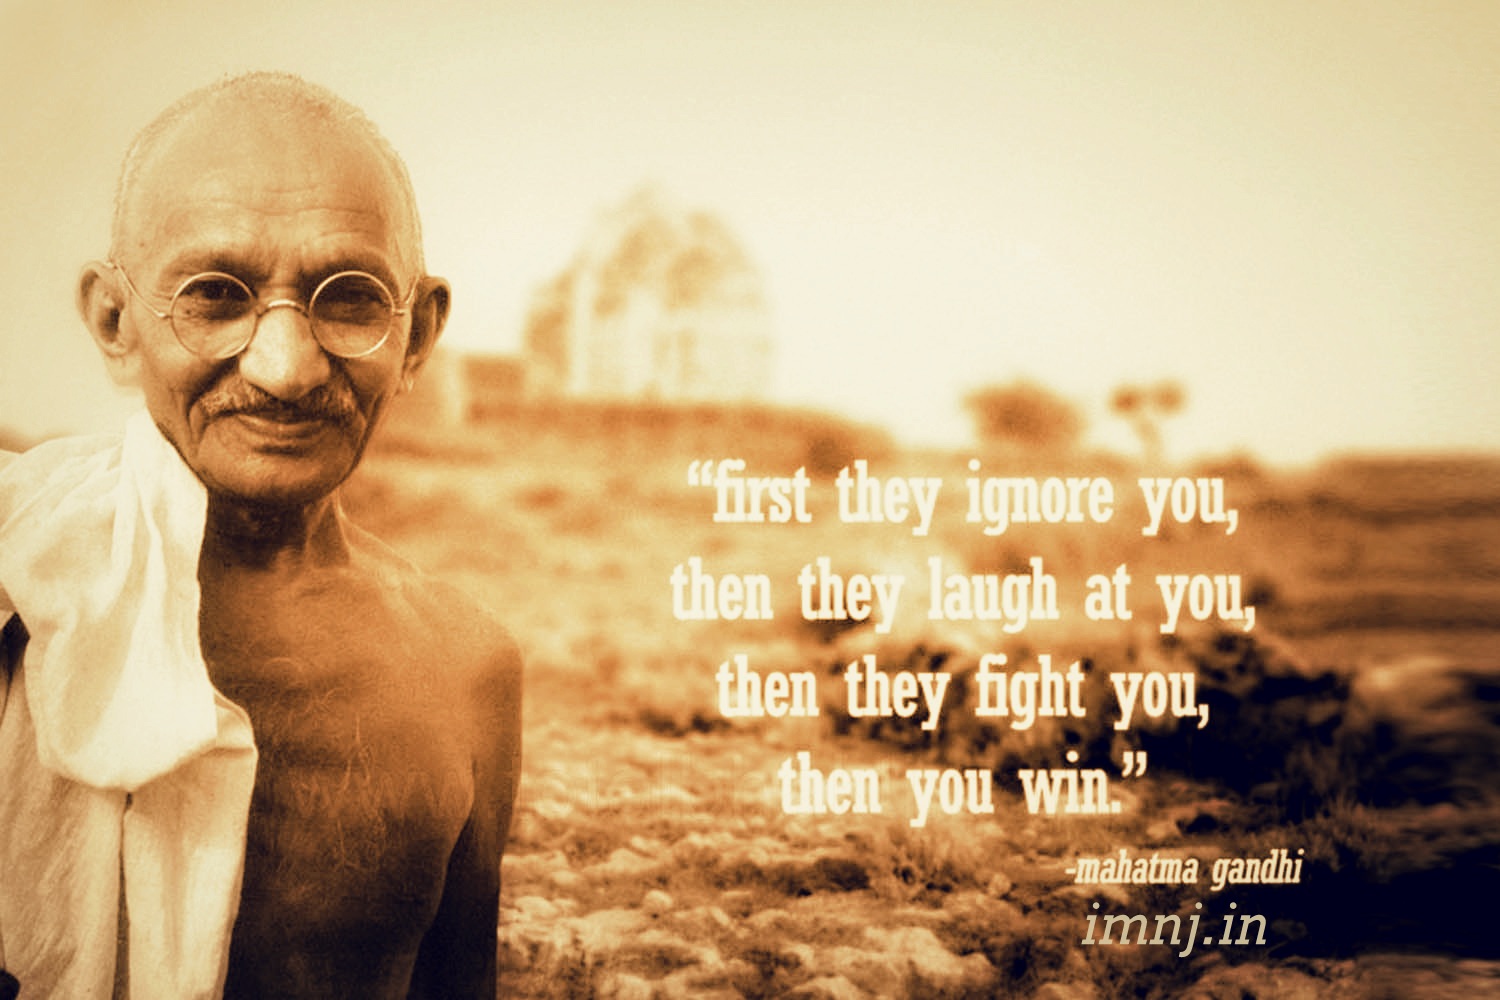 Lovers India Gandhi S Most Famous Quotes